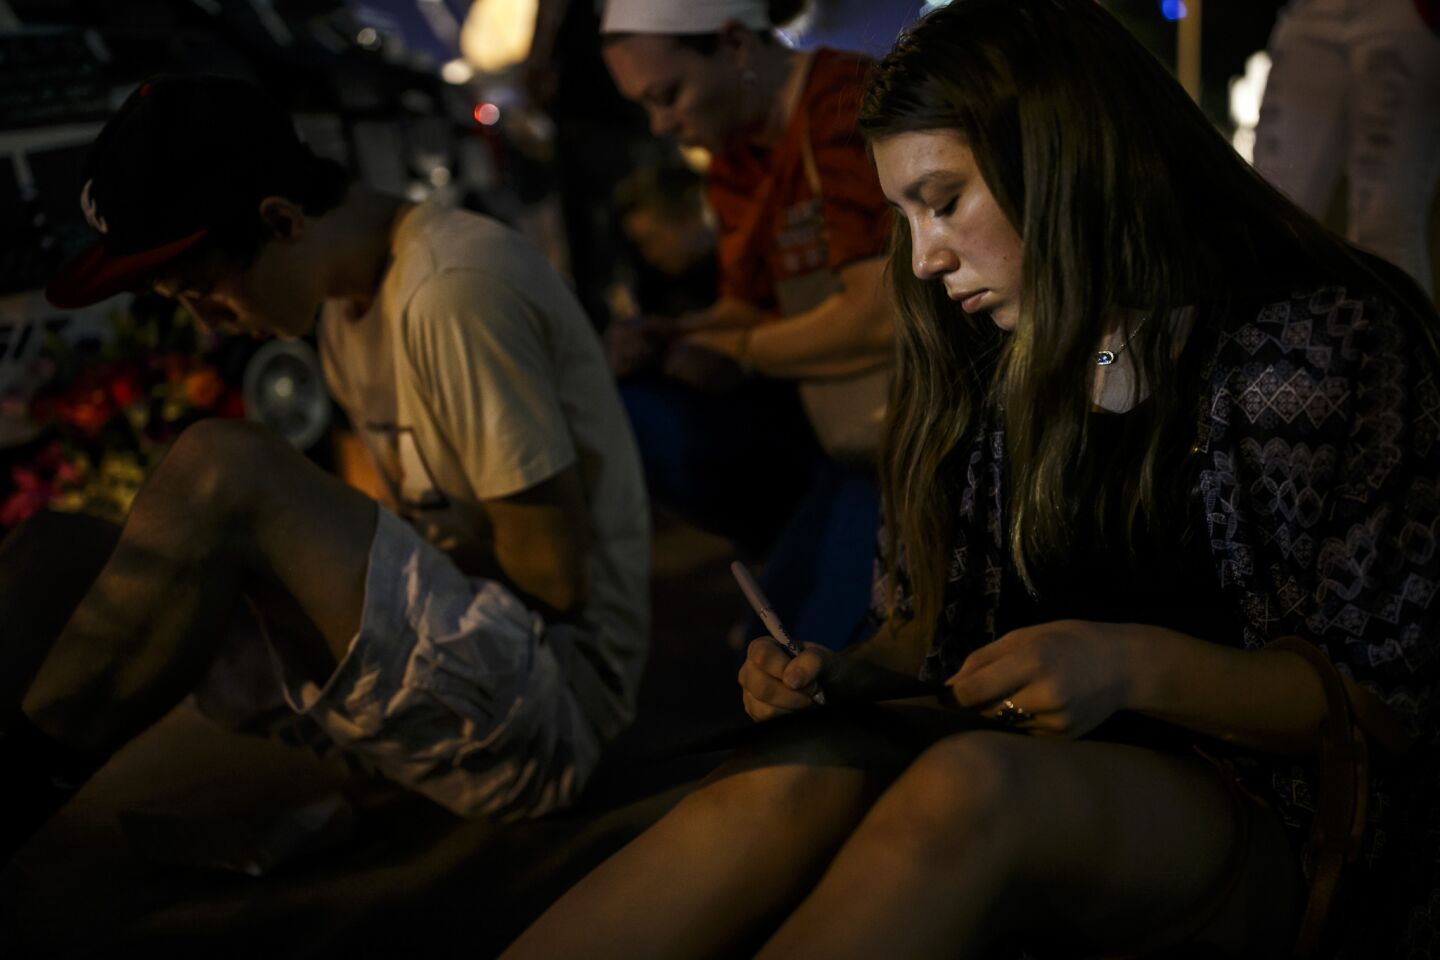 Shelby Garcia, 16, writes a note for the slain Dallas police officers.